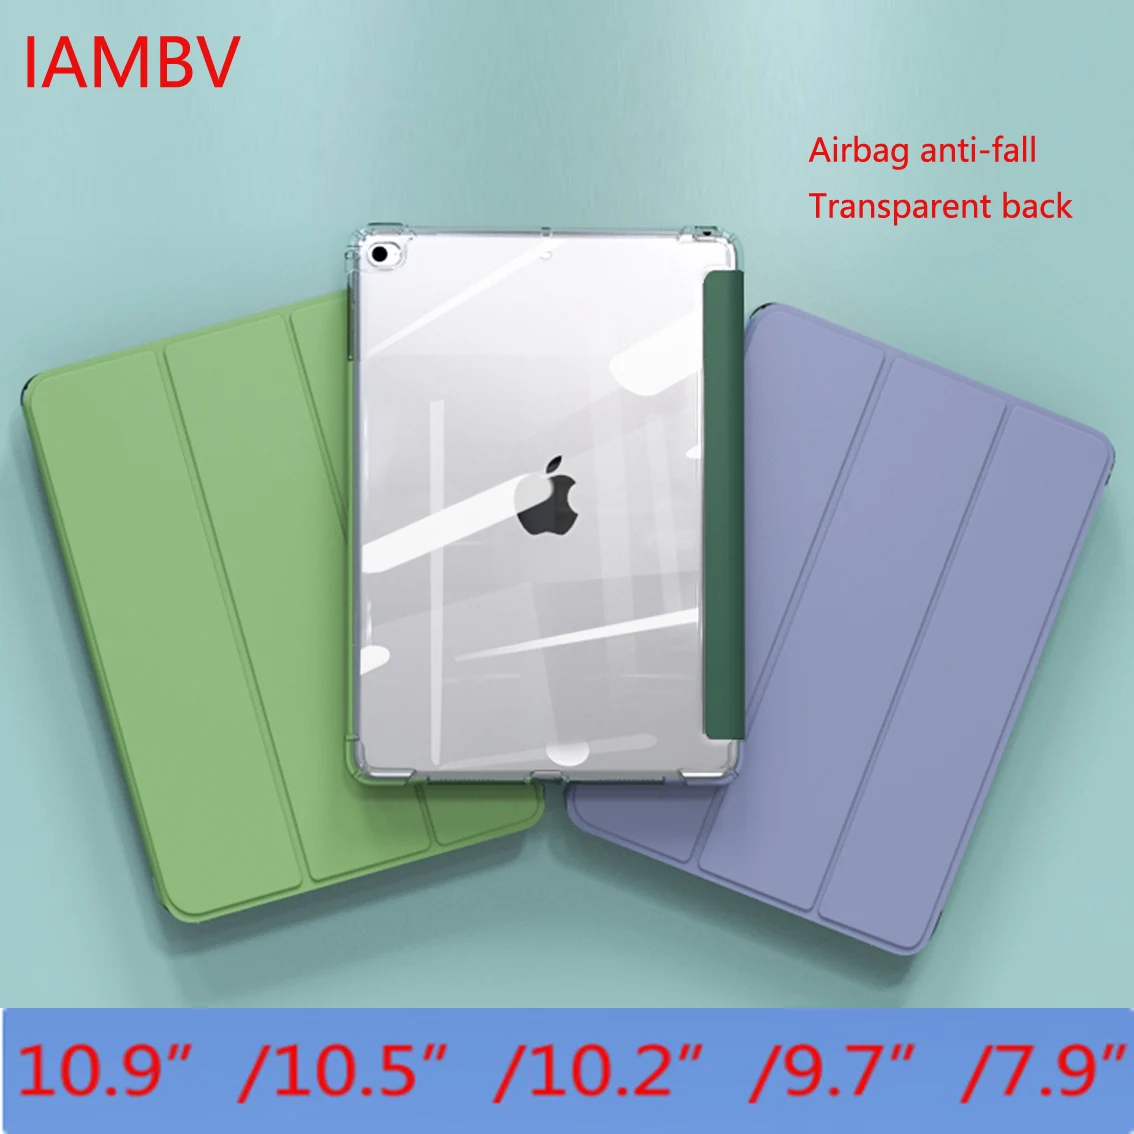 Soft shell case For iPad Air 3 Air 2 Air 1 Case Pro 11 9.7 10.2 10.5 inch ,Case for iPad